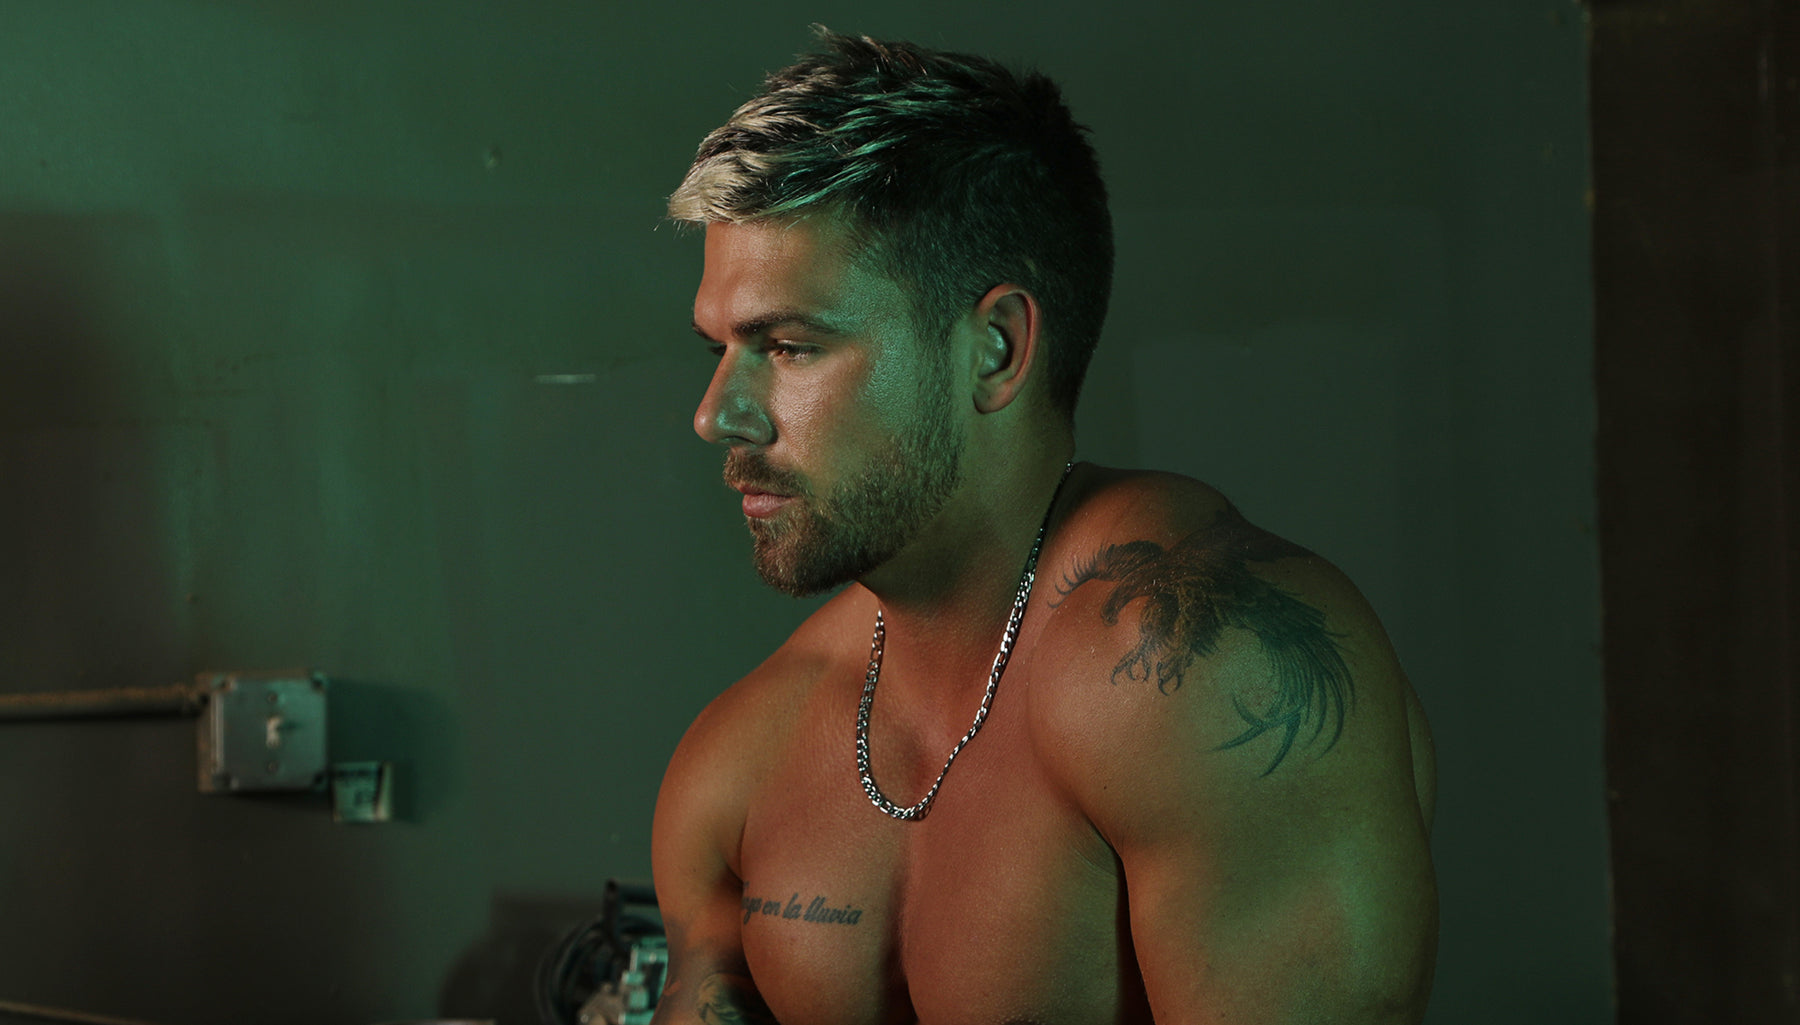 New Images with Joss Mooney